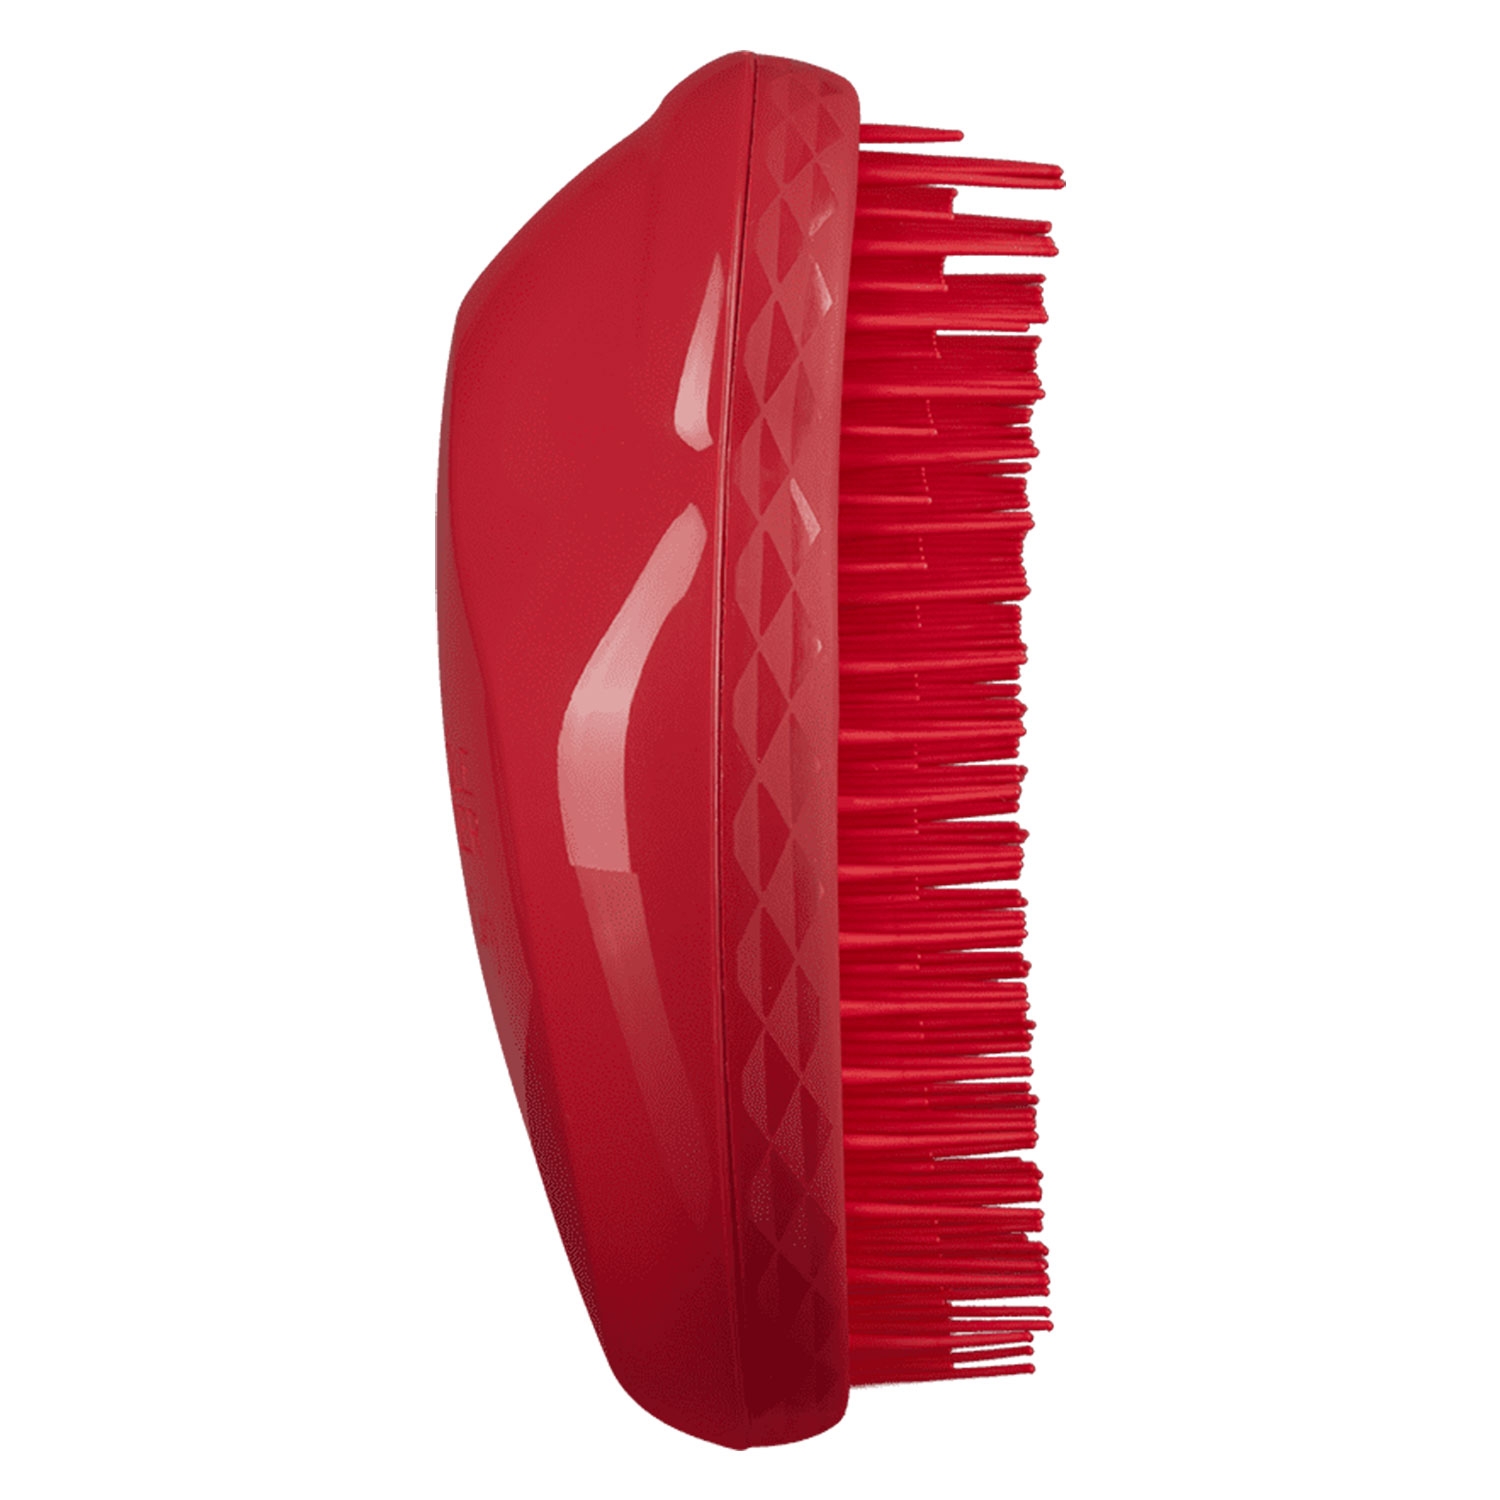 Product image from Tangle Teezer - Thick & Curly Salsa Red